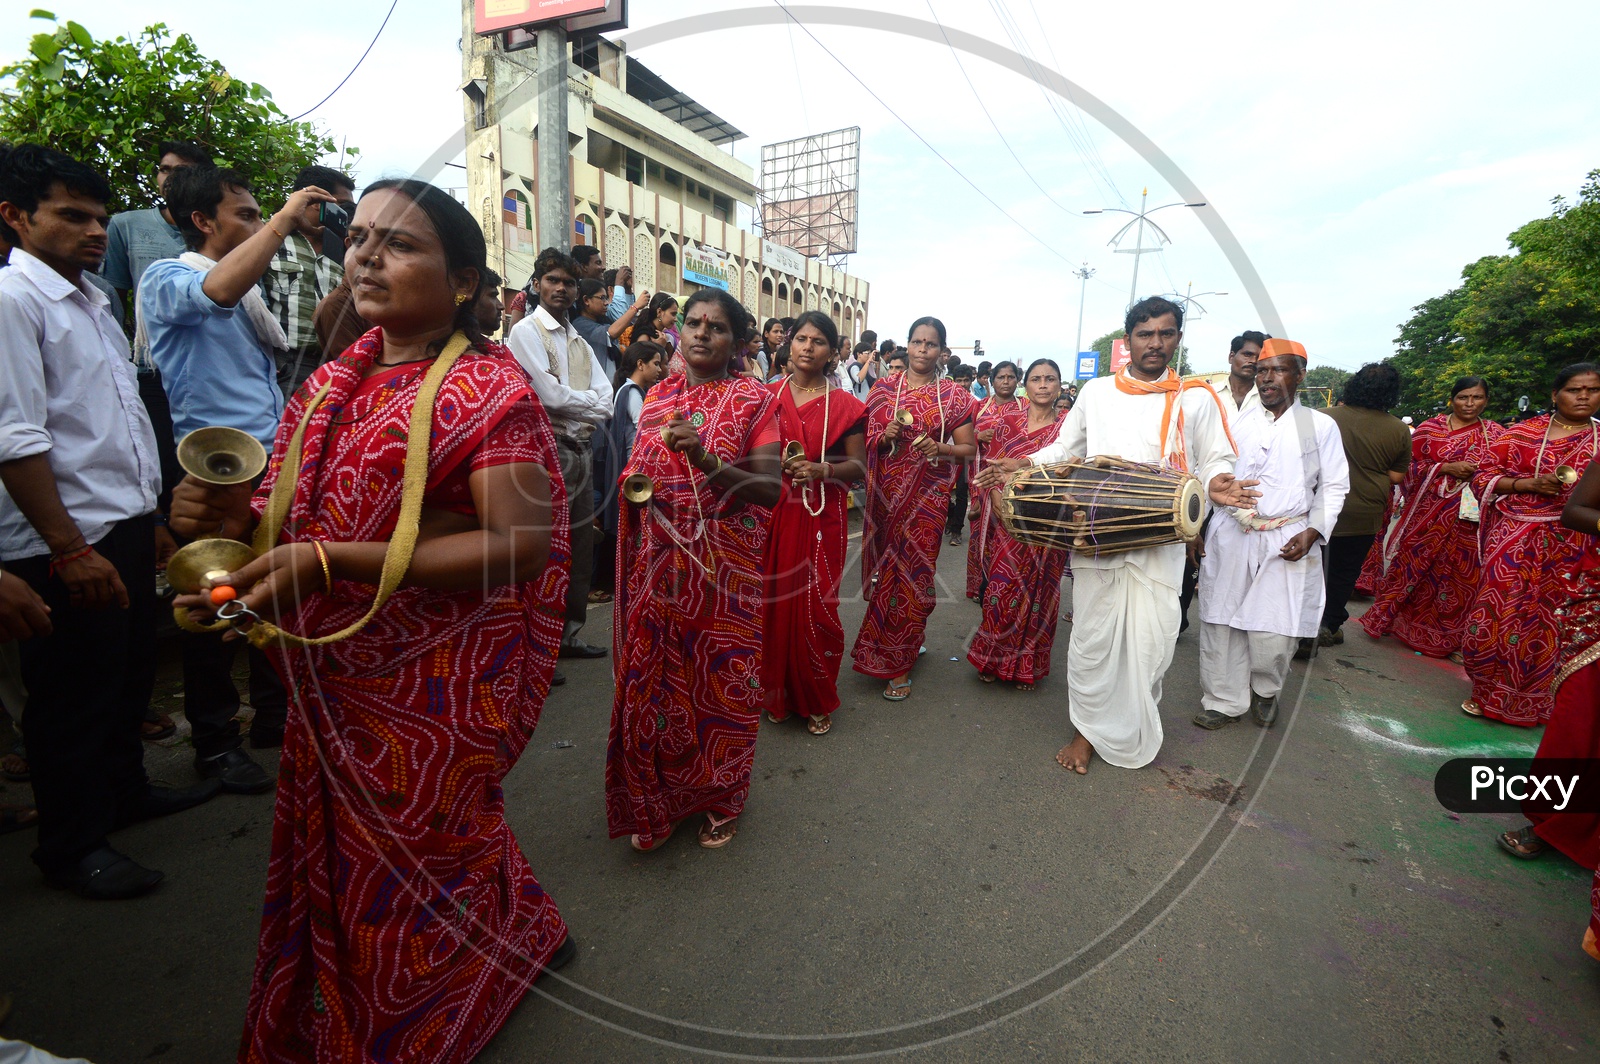 Indian Traditional Musicians On the Hindu God Processions On Streets Of India